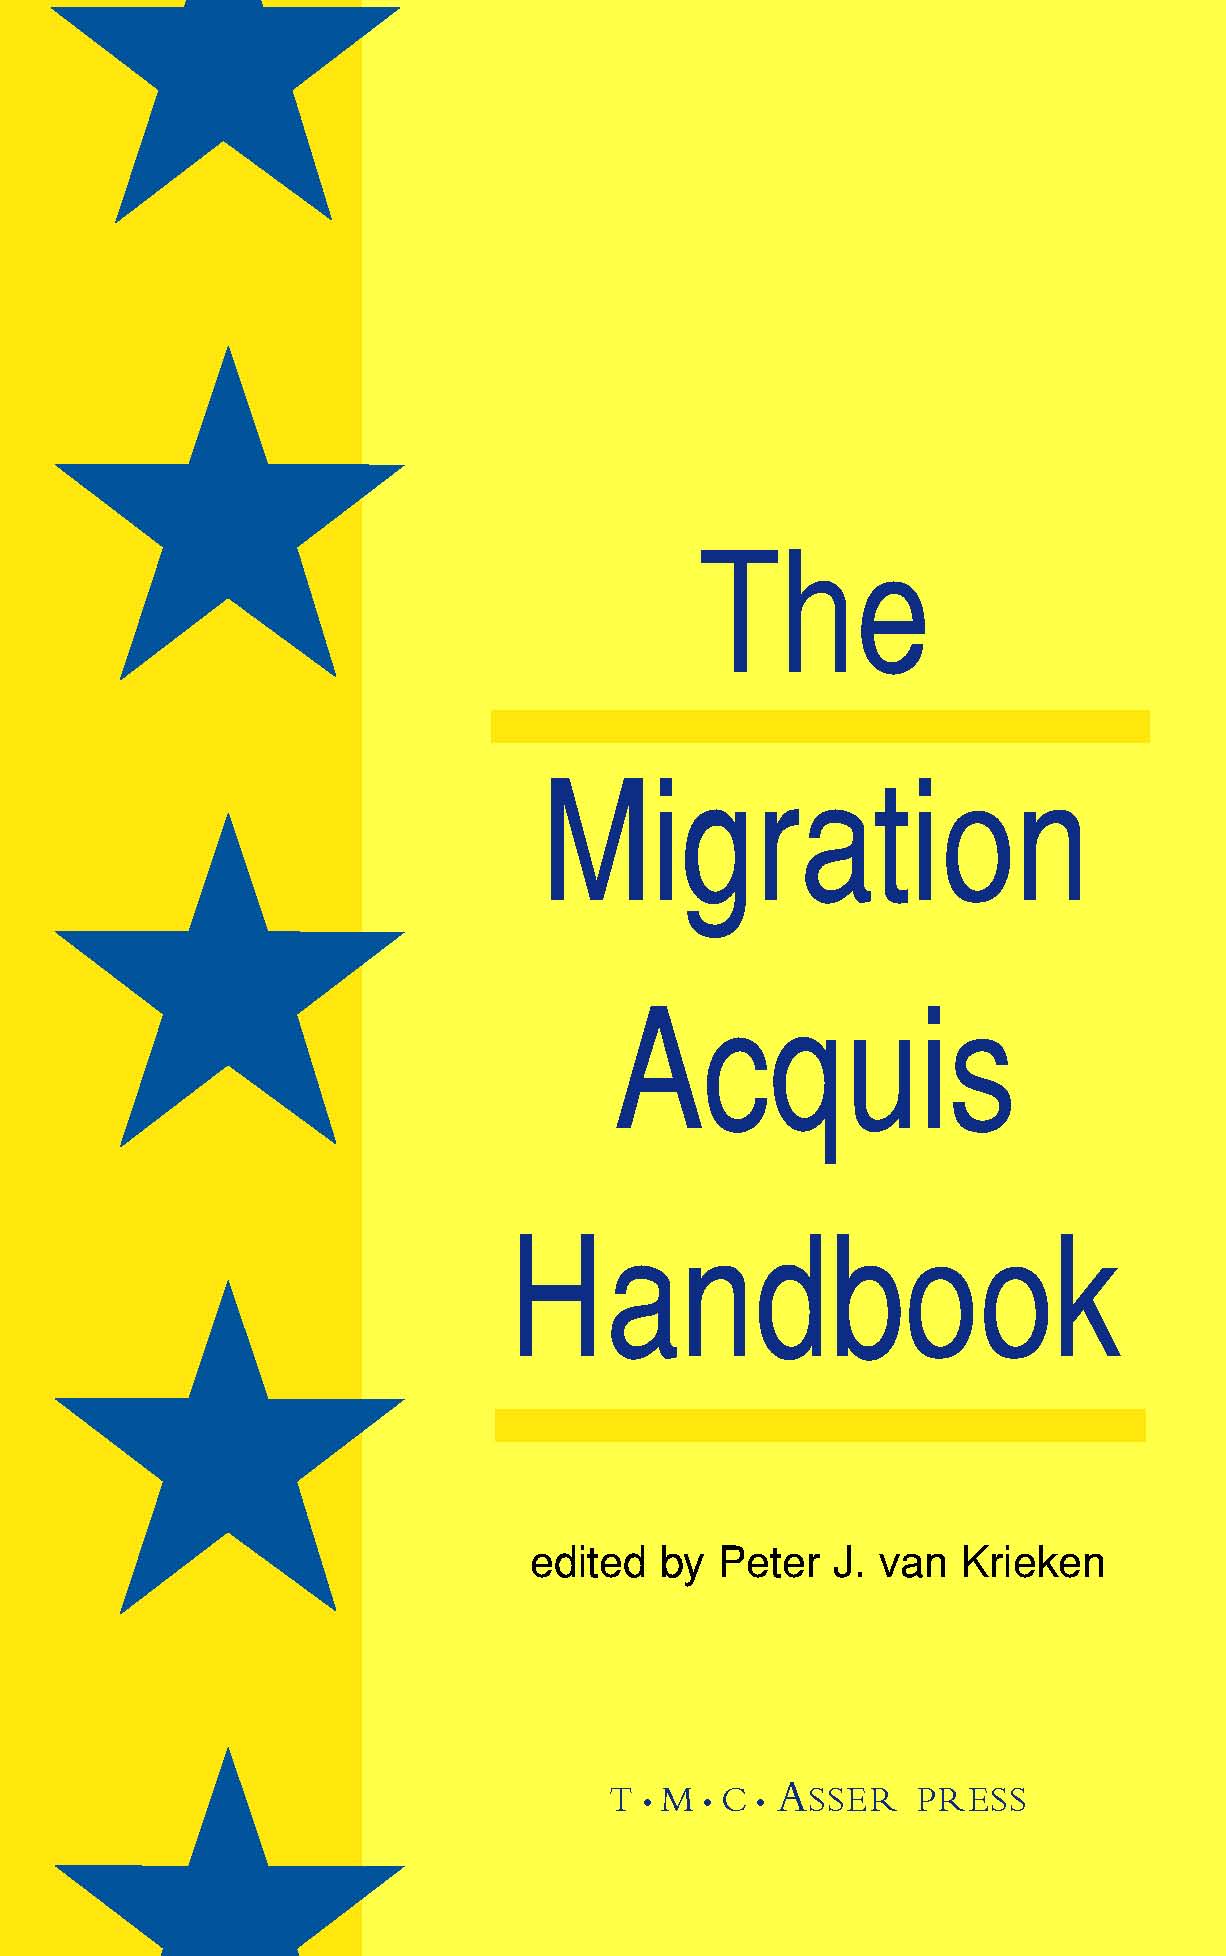 The Migration Acquis Handbook - The Foundation for a Common European Migration Policy